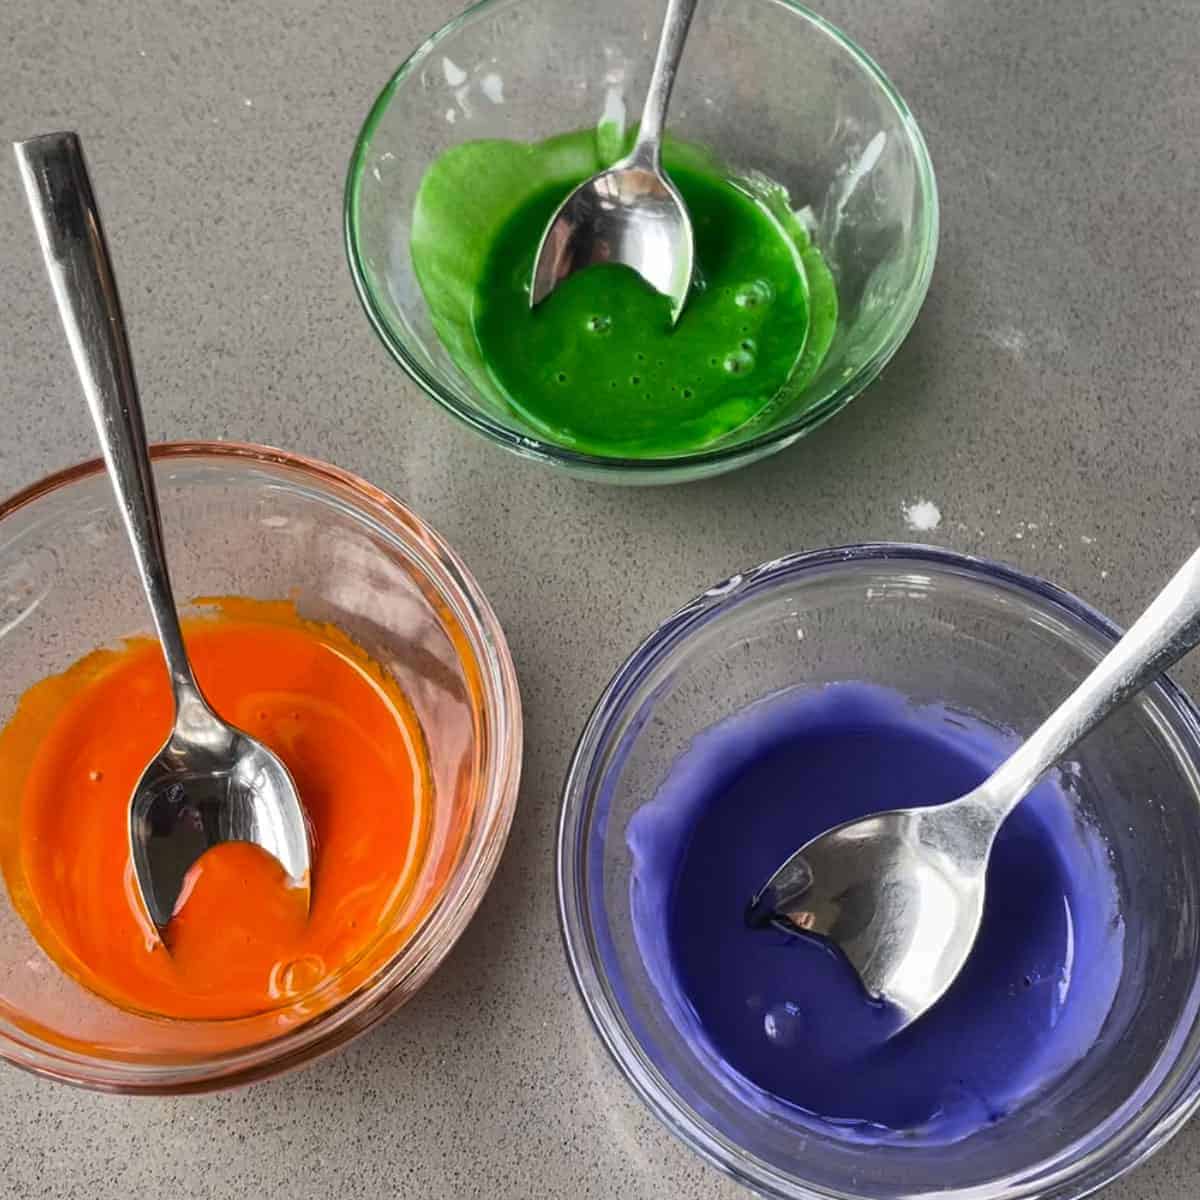 Green, orange and blue icing in glass bowls on a grey bench.